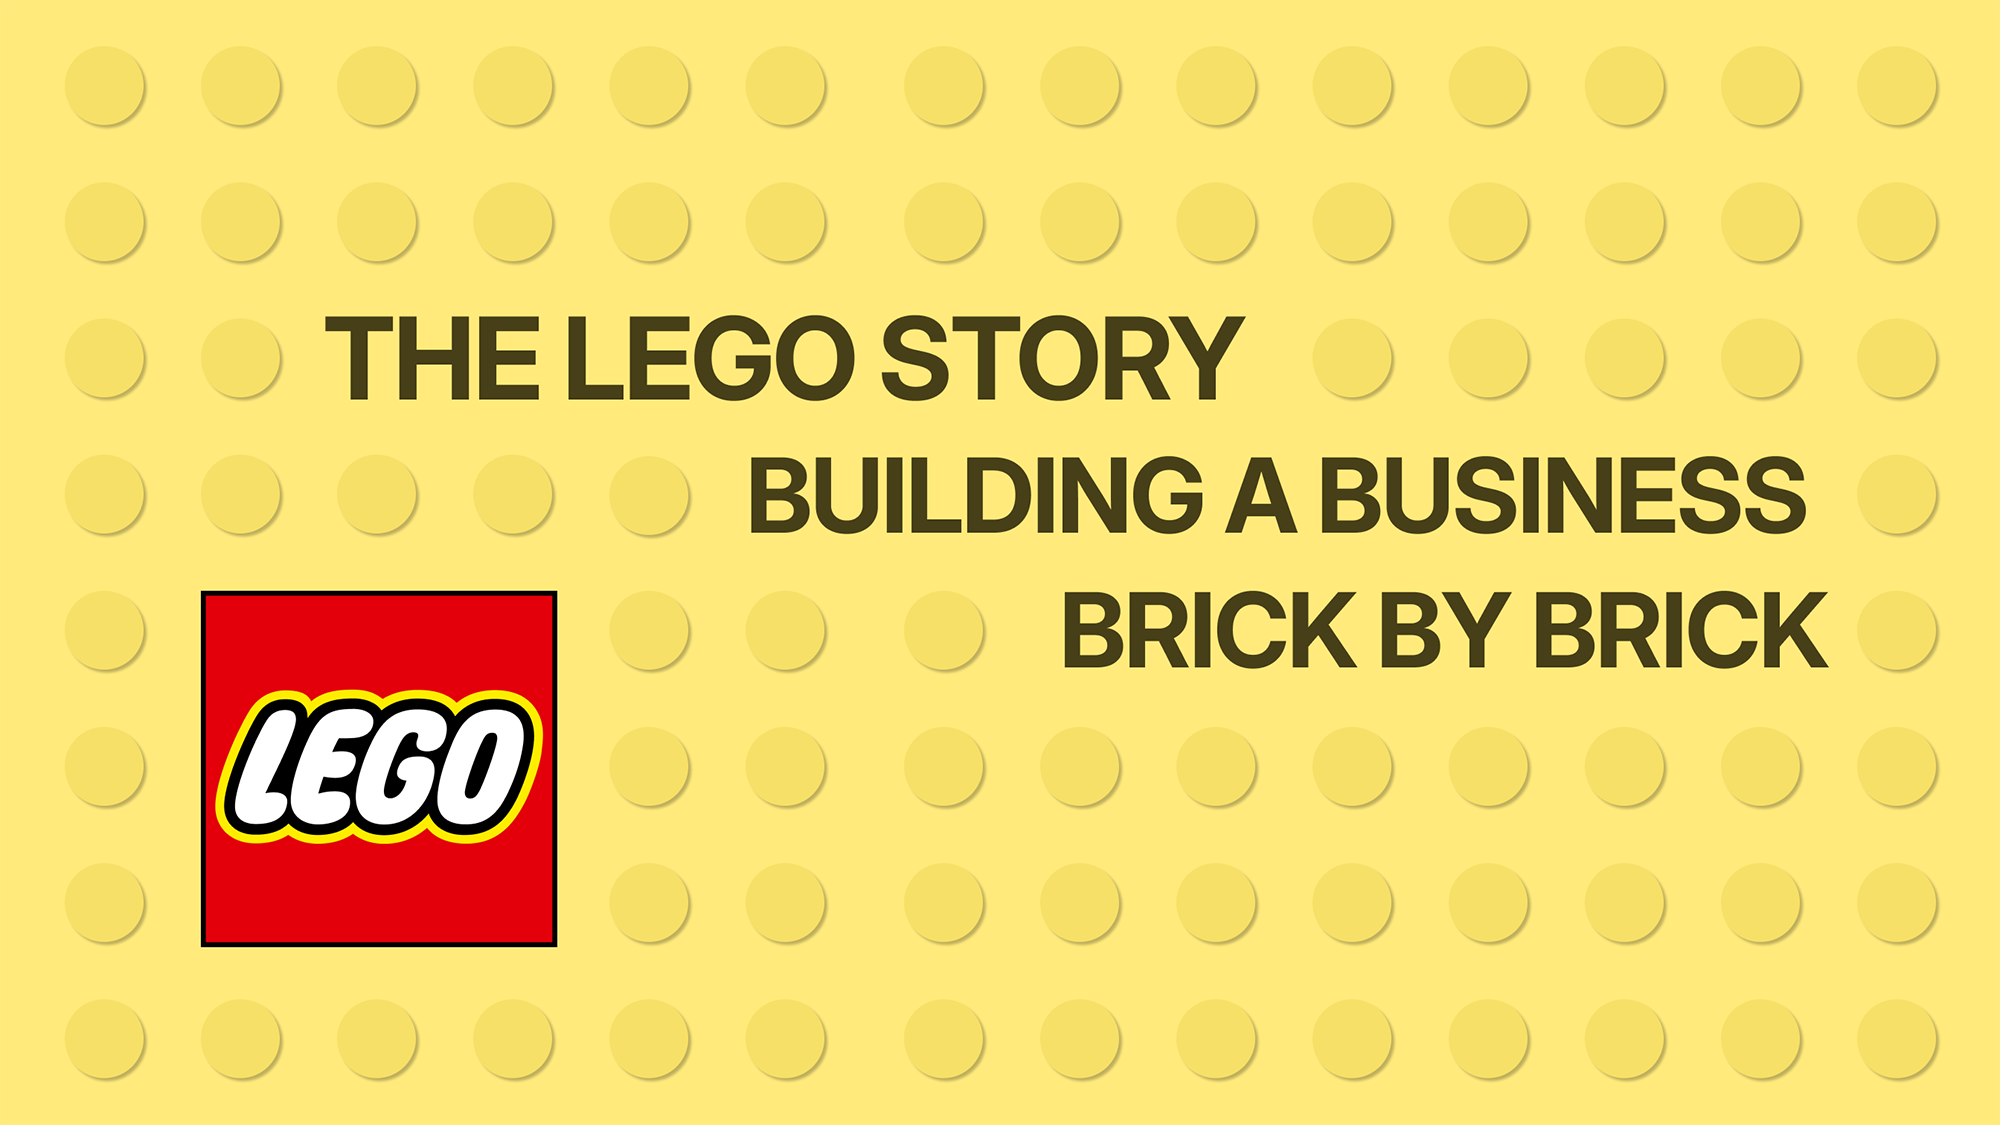 The Lego story: Building a business, brick by brick